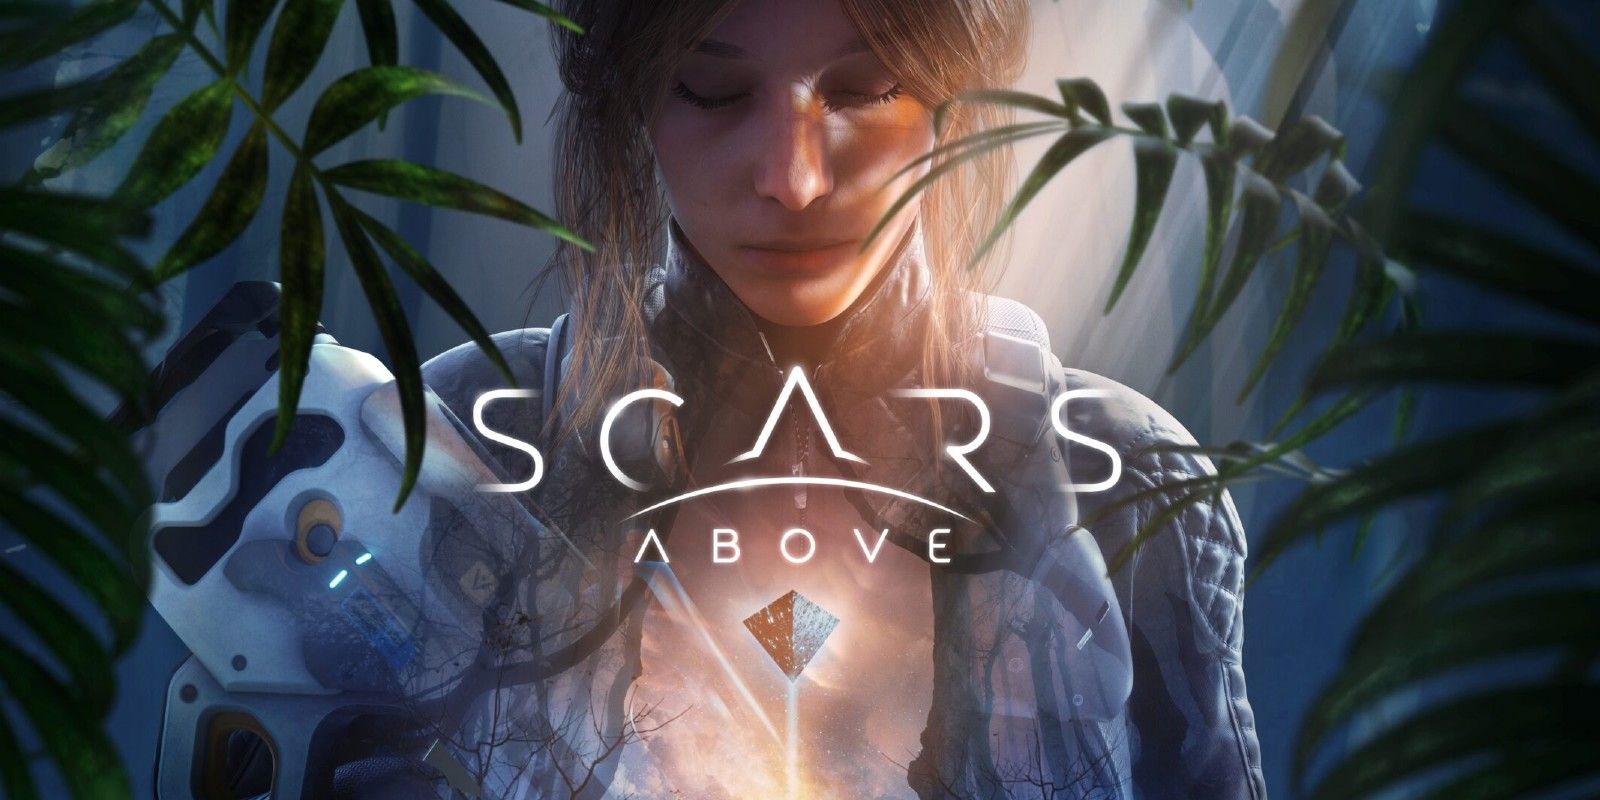 scars above science fiction action